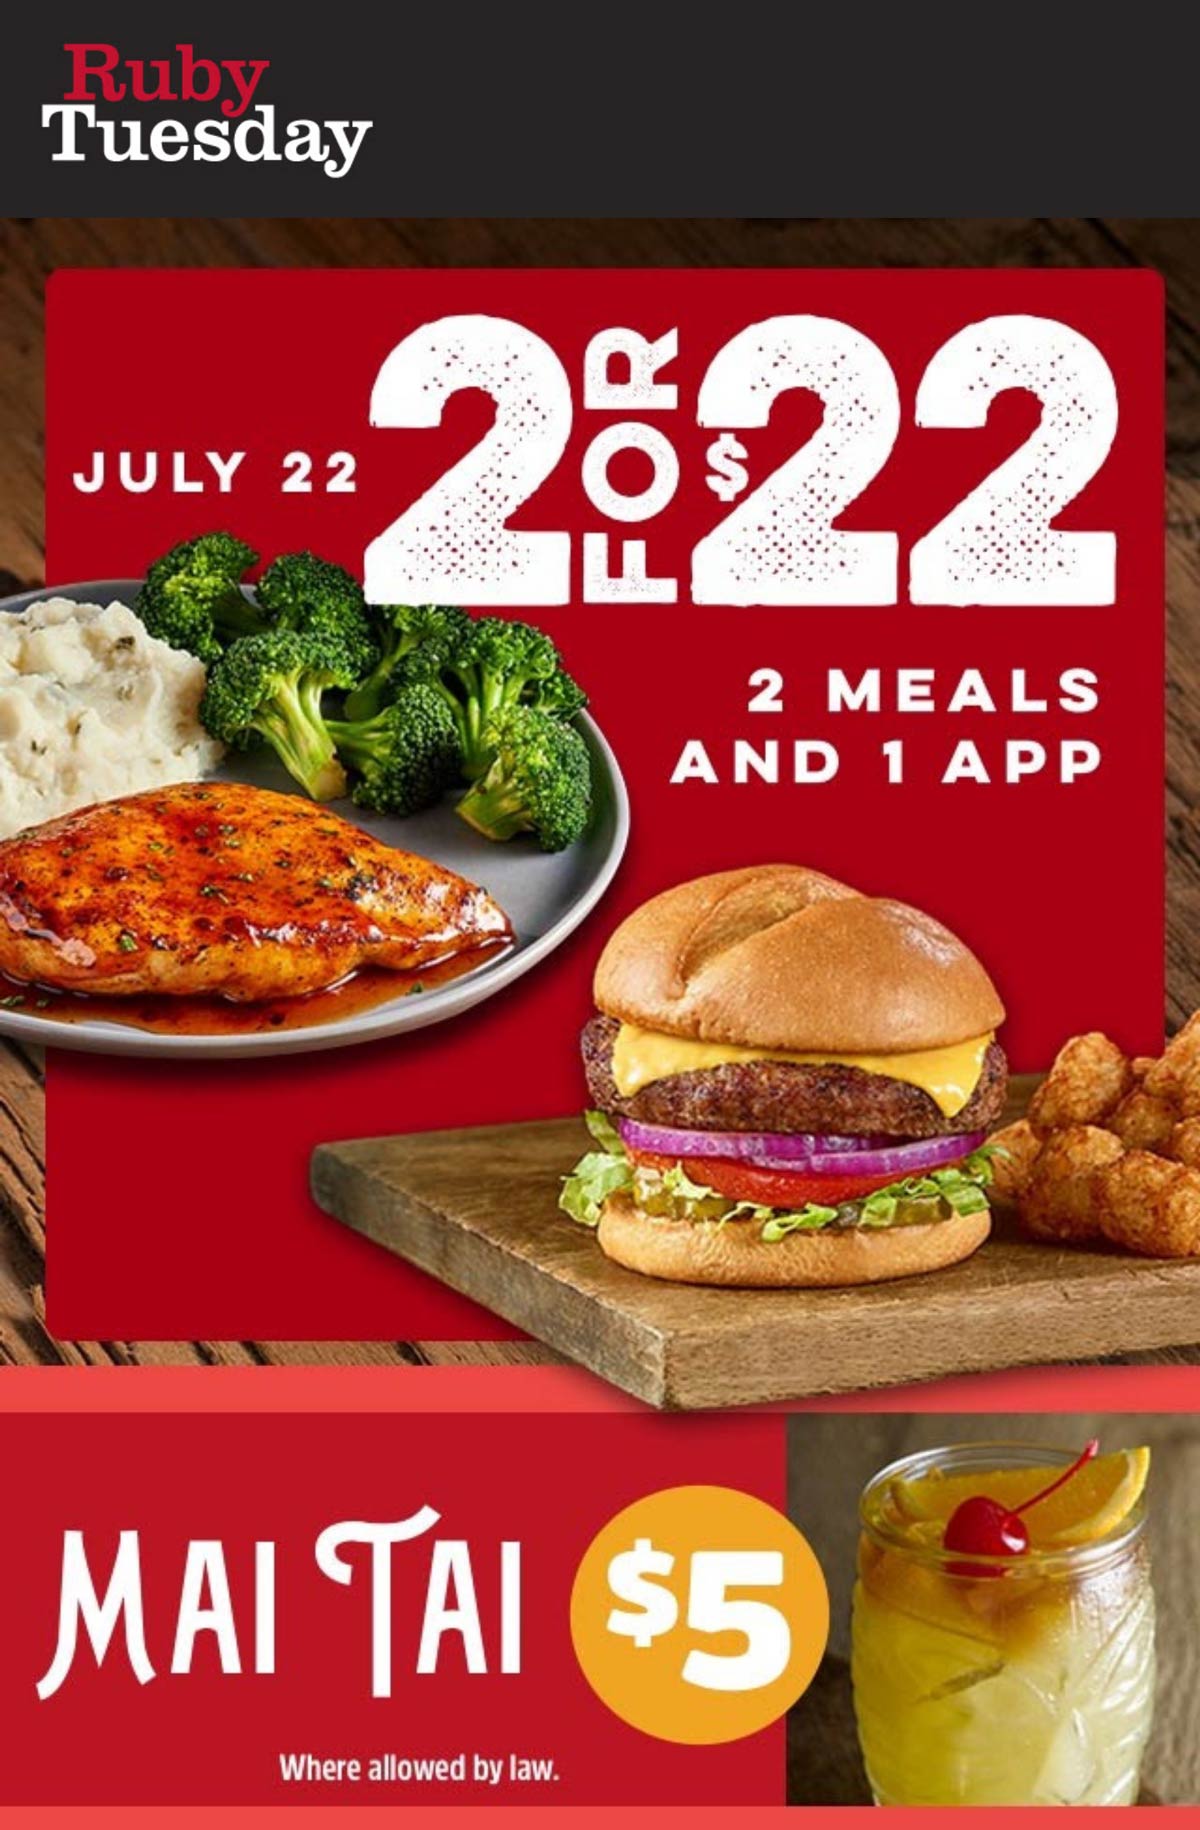 Ruby Tuesday restaurants Coupon  2 meals + appetizer = $22 today at Ruby Tuesday #rubytuesday 